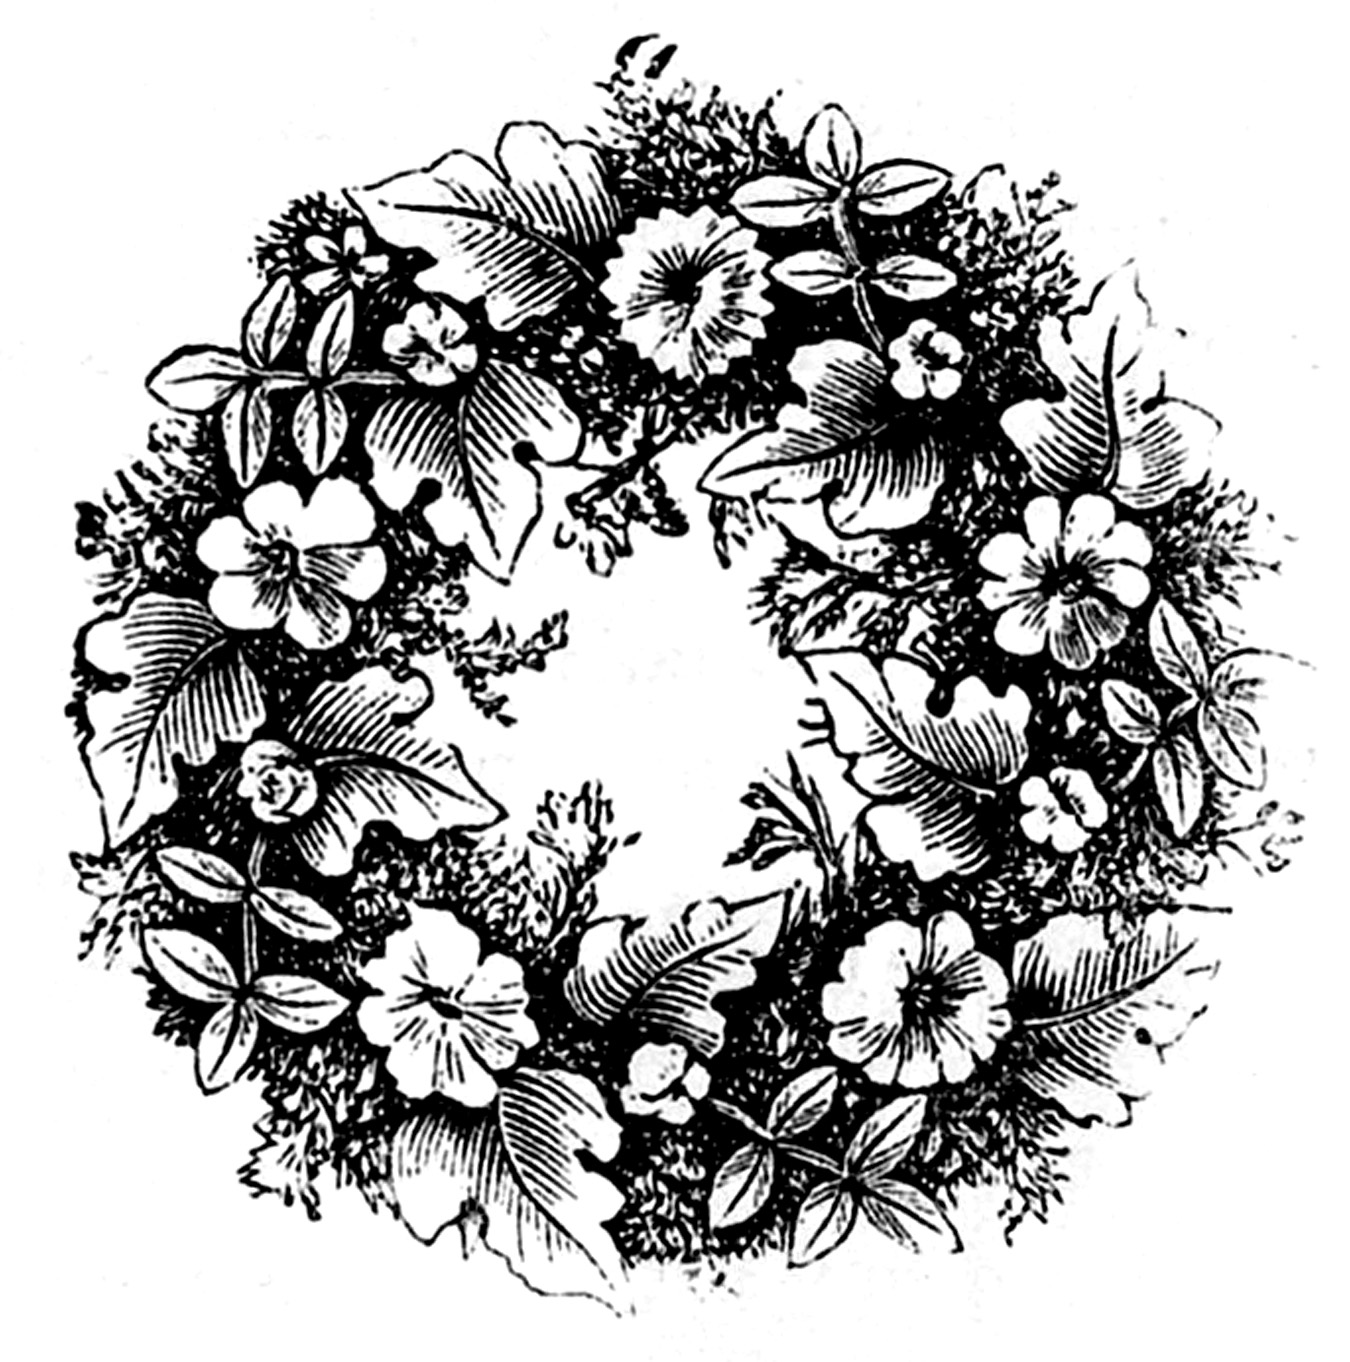 Free Vintage Wreath Cliparts, Download Free Clip Art, Free.